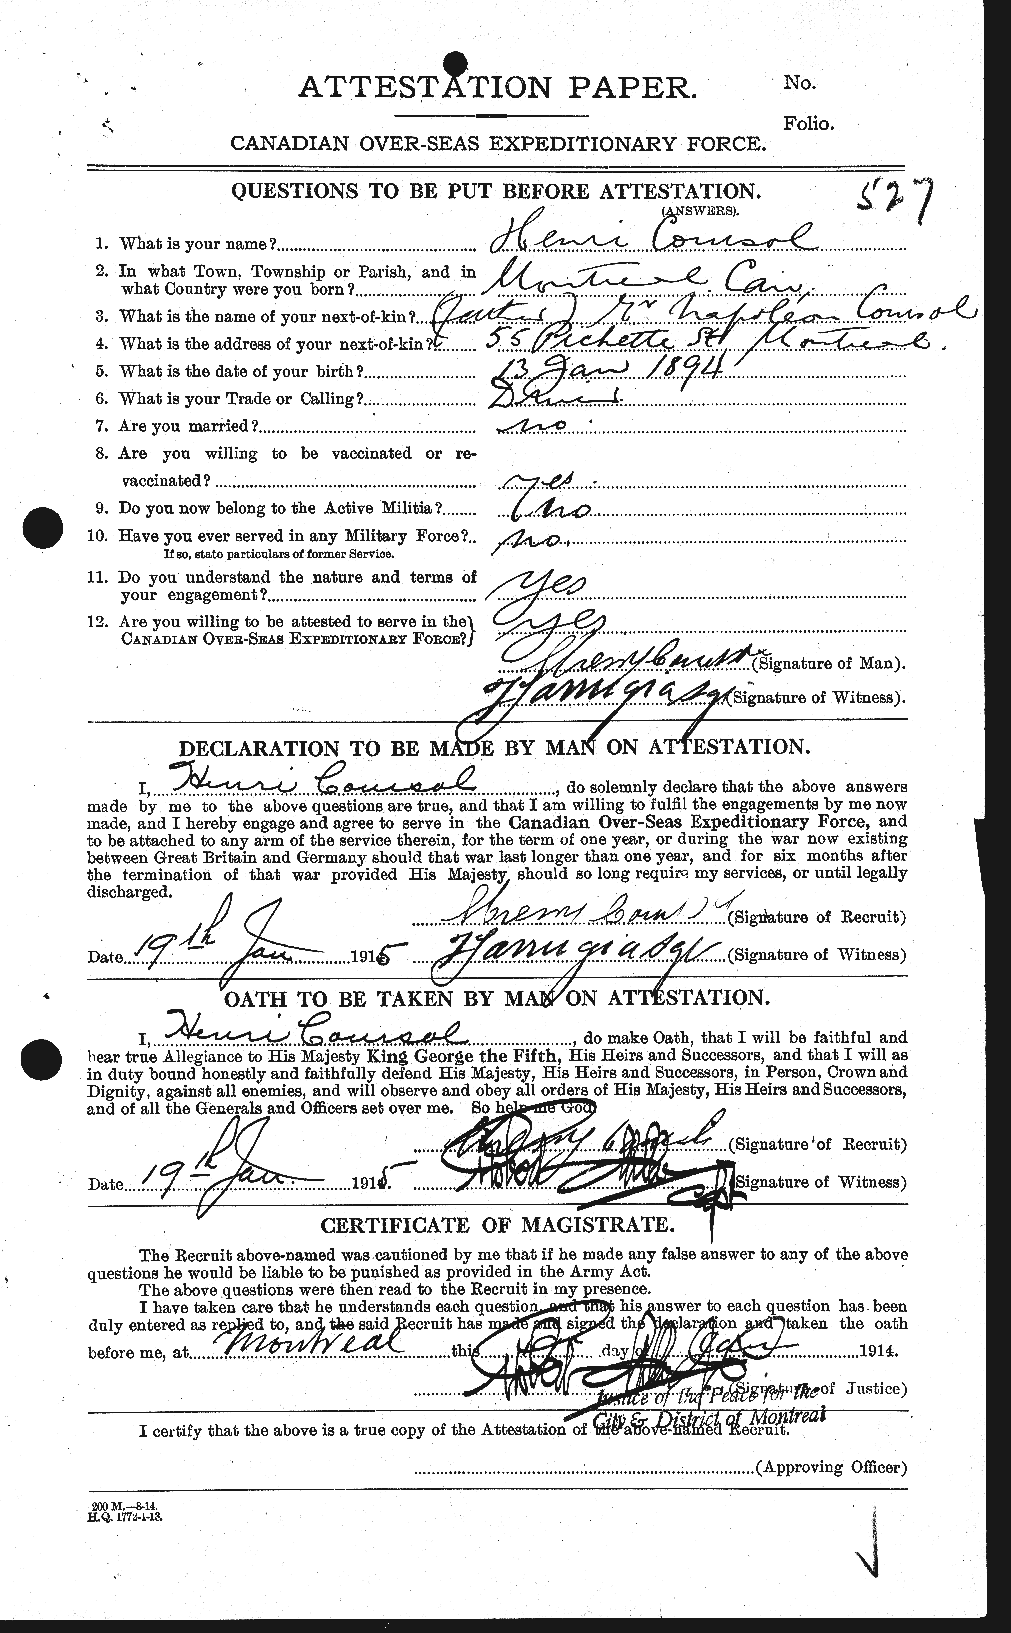 Personnel Records of the First World War - CEF 061896a